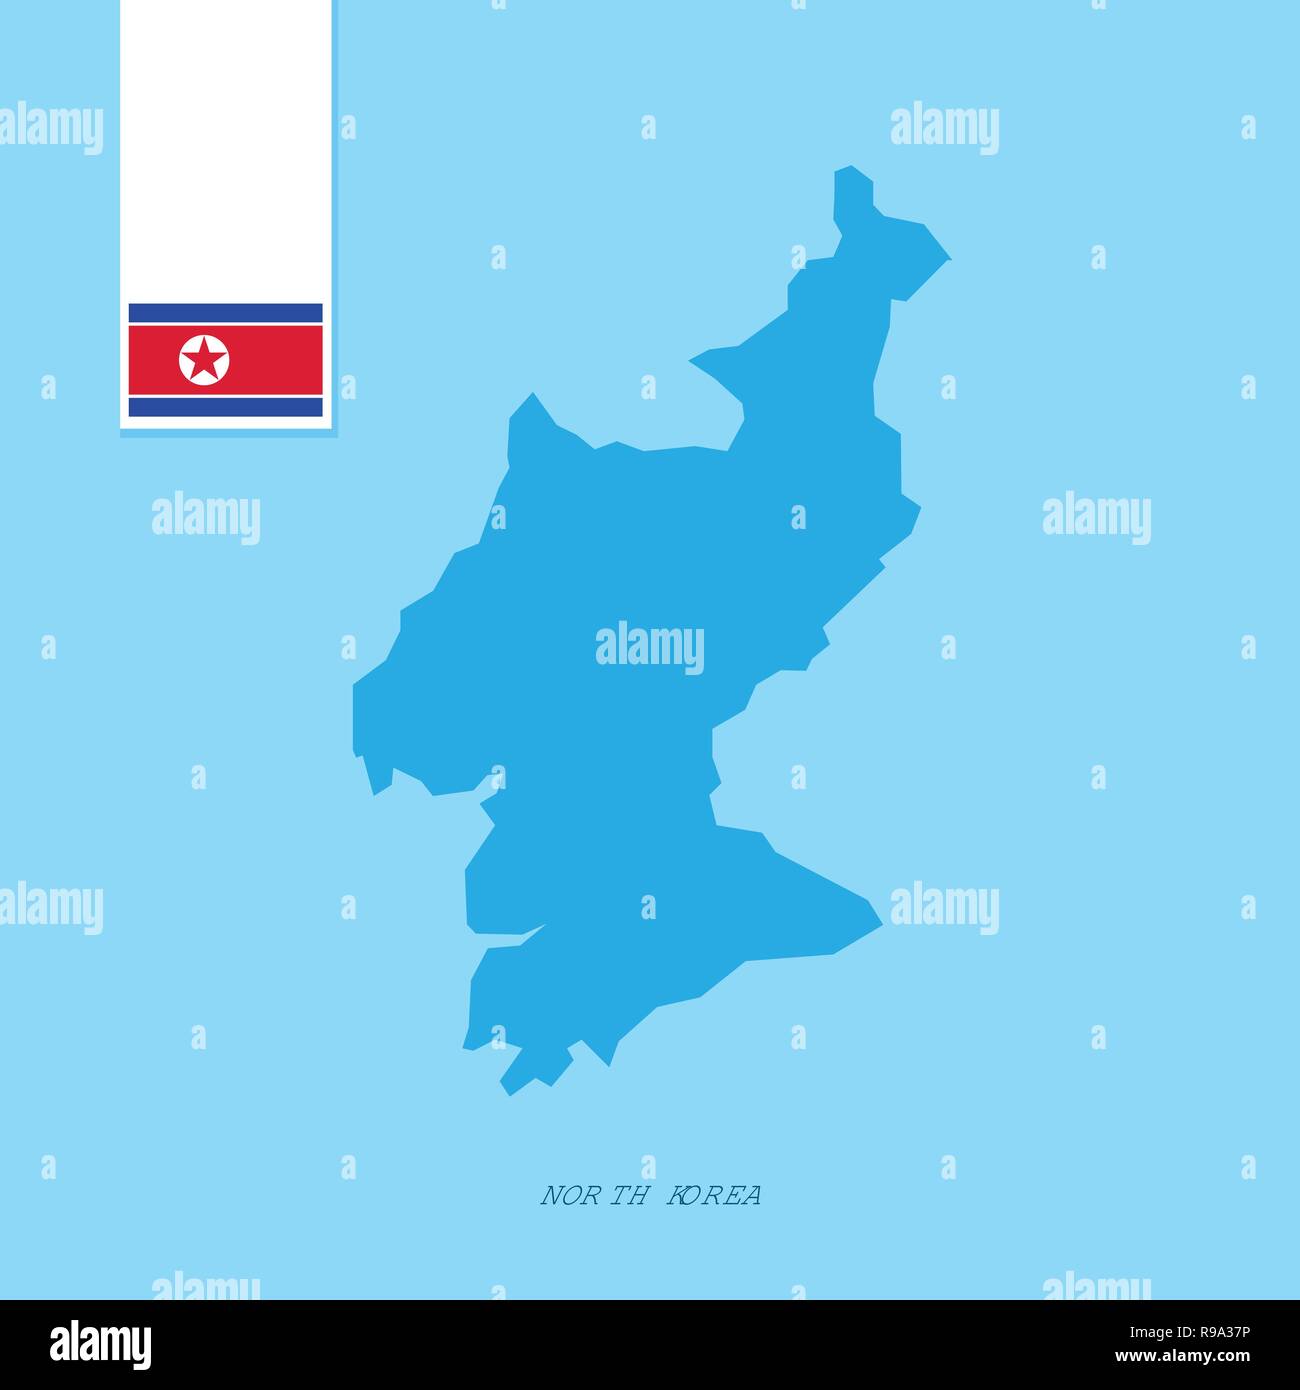 North south korea map Stock Vector Images - Alamy